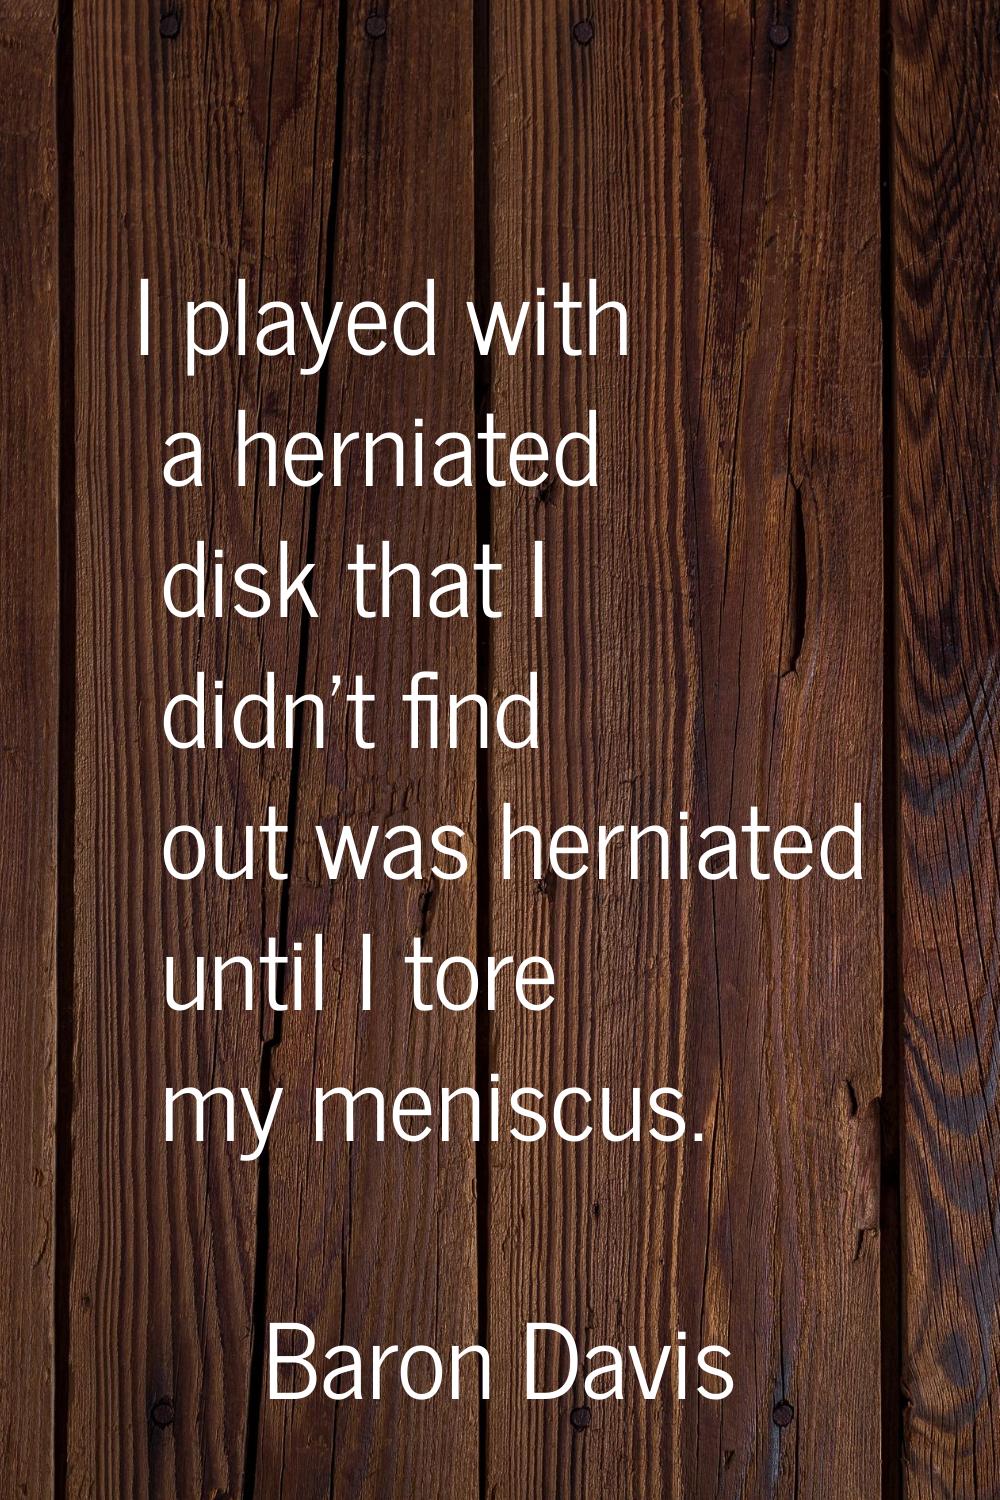 I played with a herniated disk that I didn't find out was herniated until I tore my meniscus.